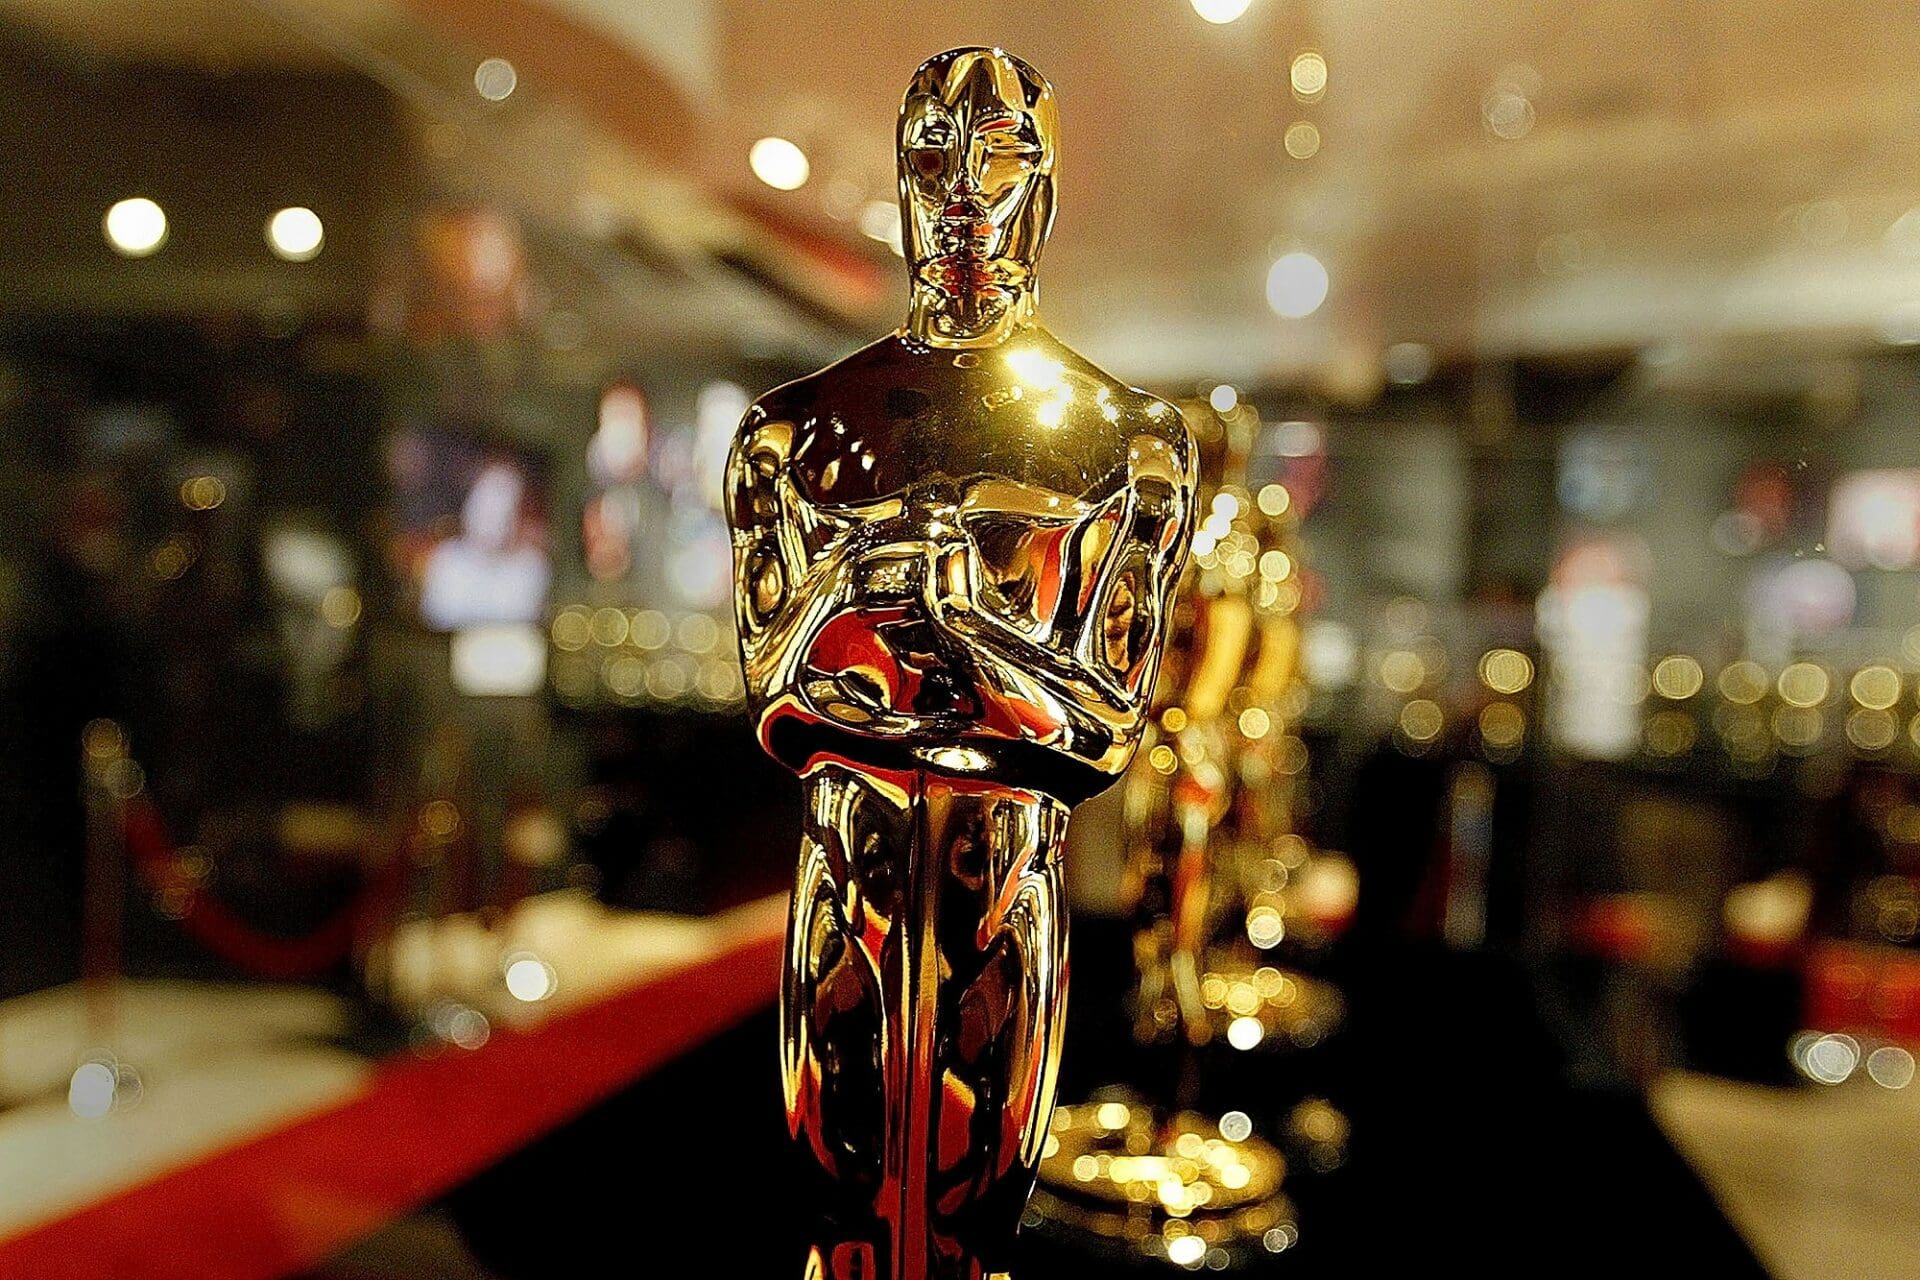 NEWS: Rolex to sponsor the Oscars – and what this means